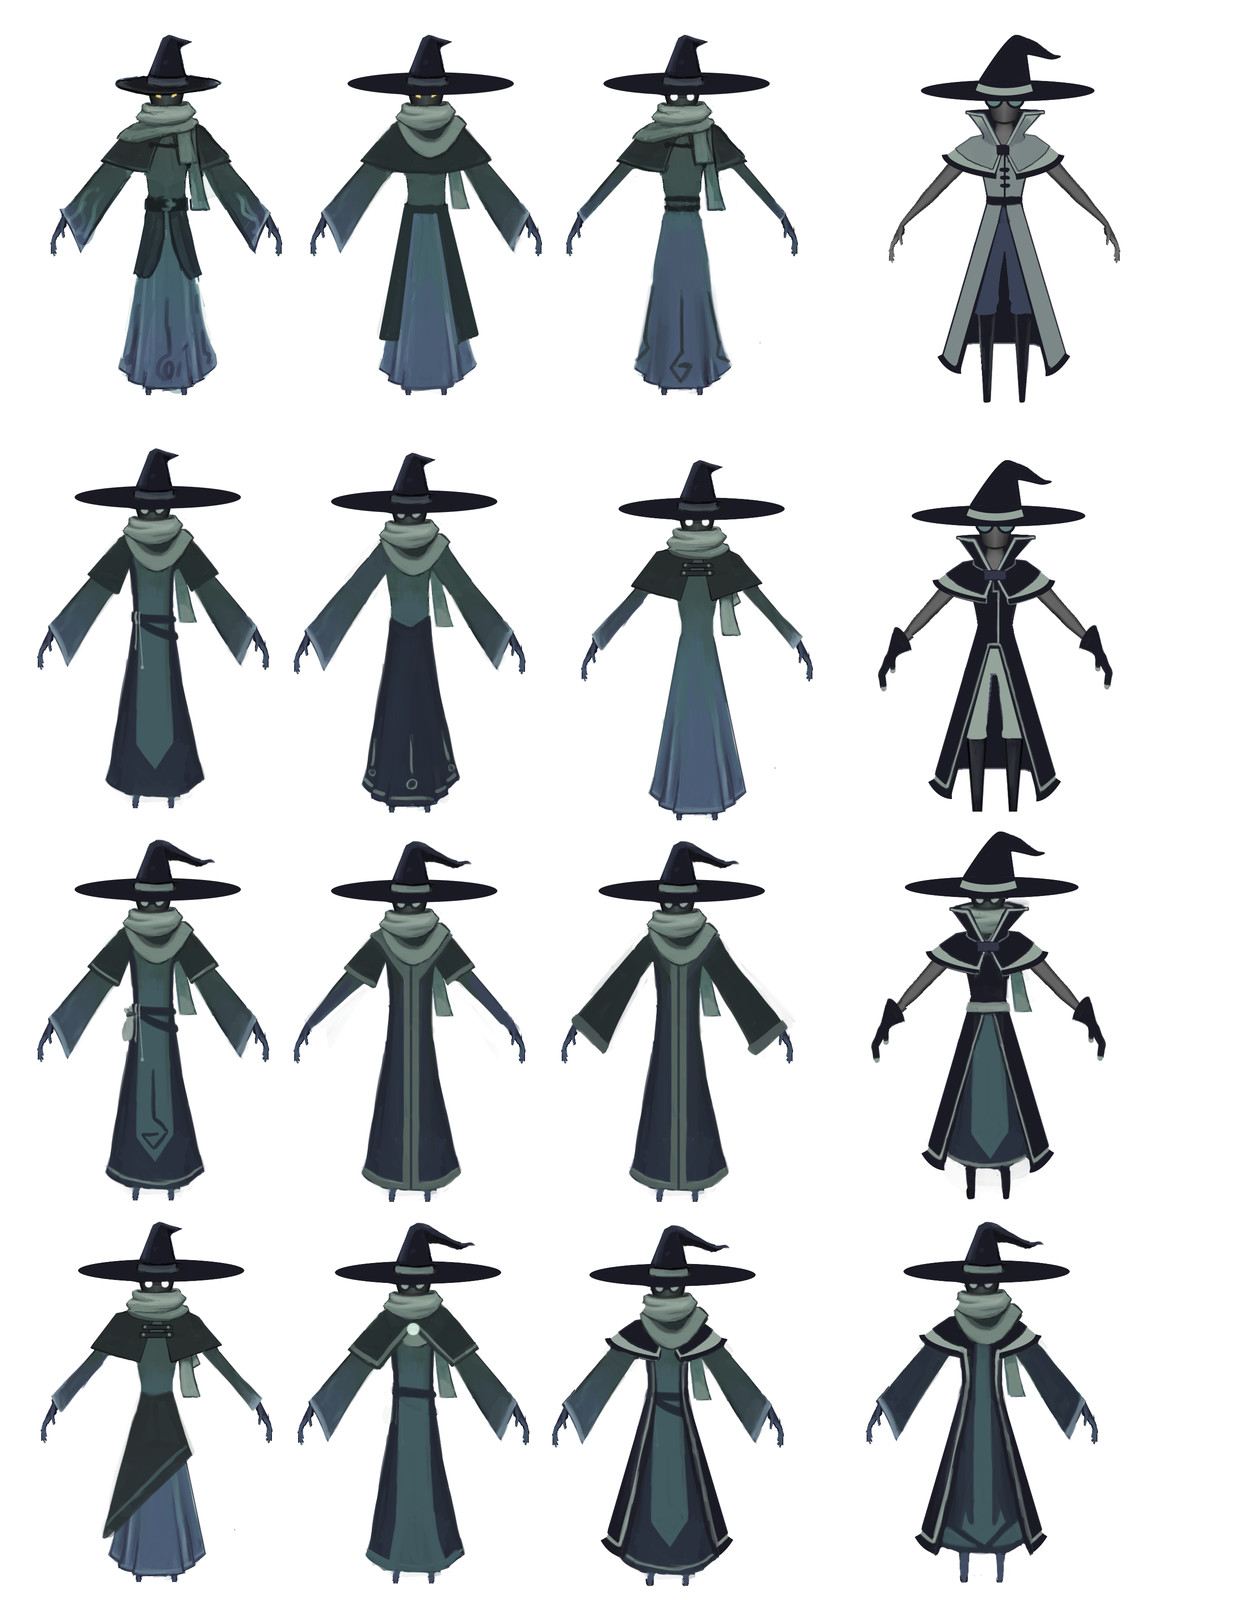 More arcanist thumbnails. We got pretty close to narrowing down the direction we wanted to take this traditional witch/wizard set.